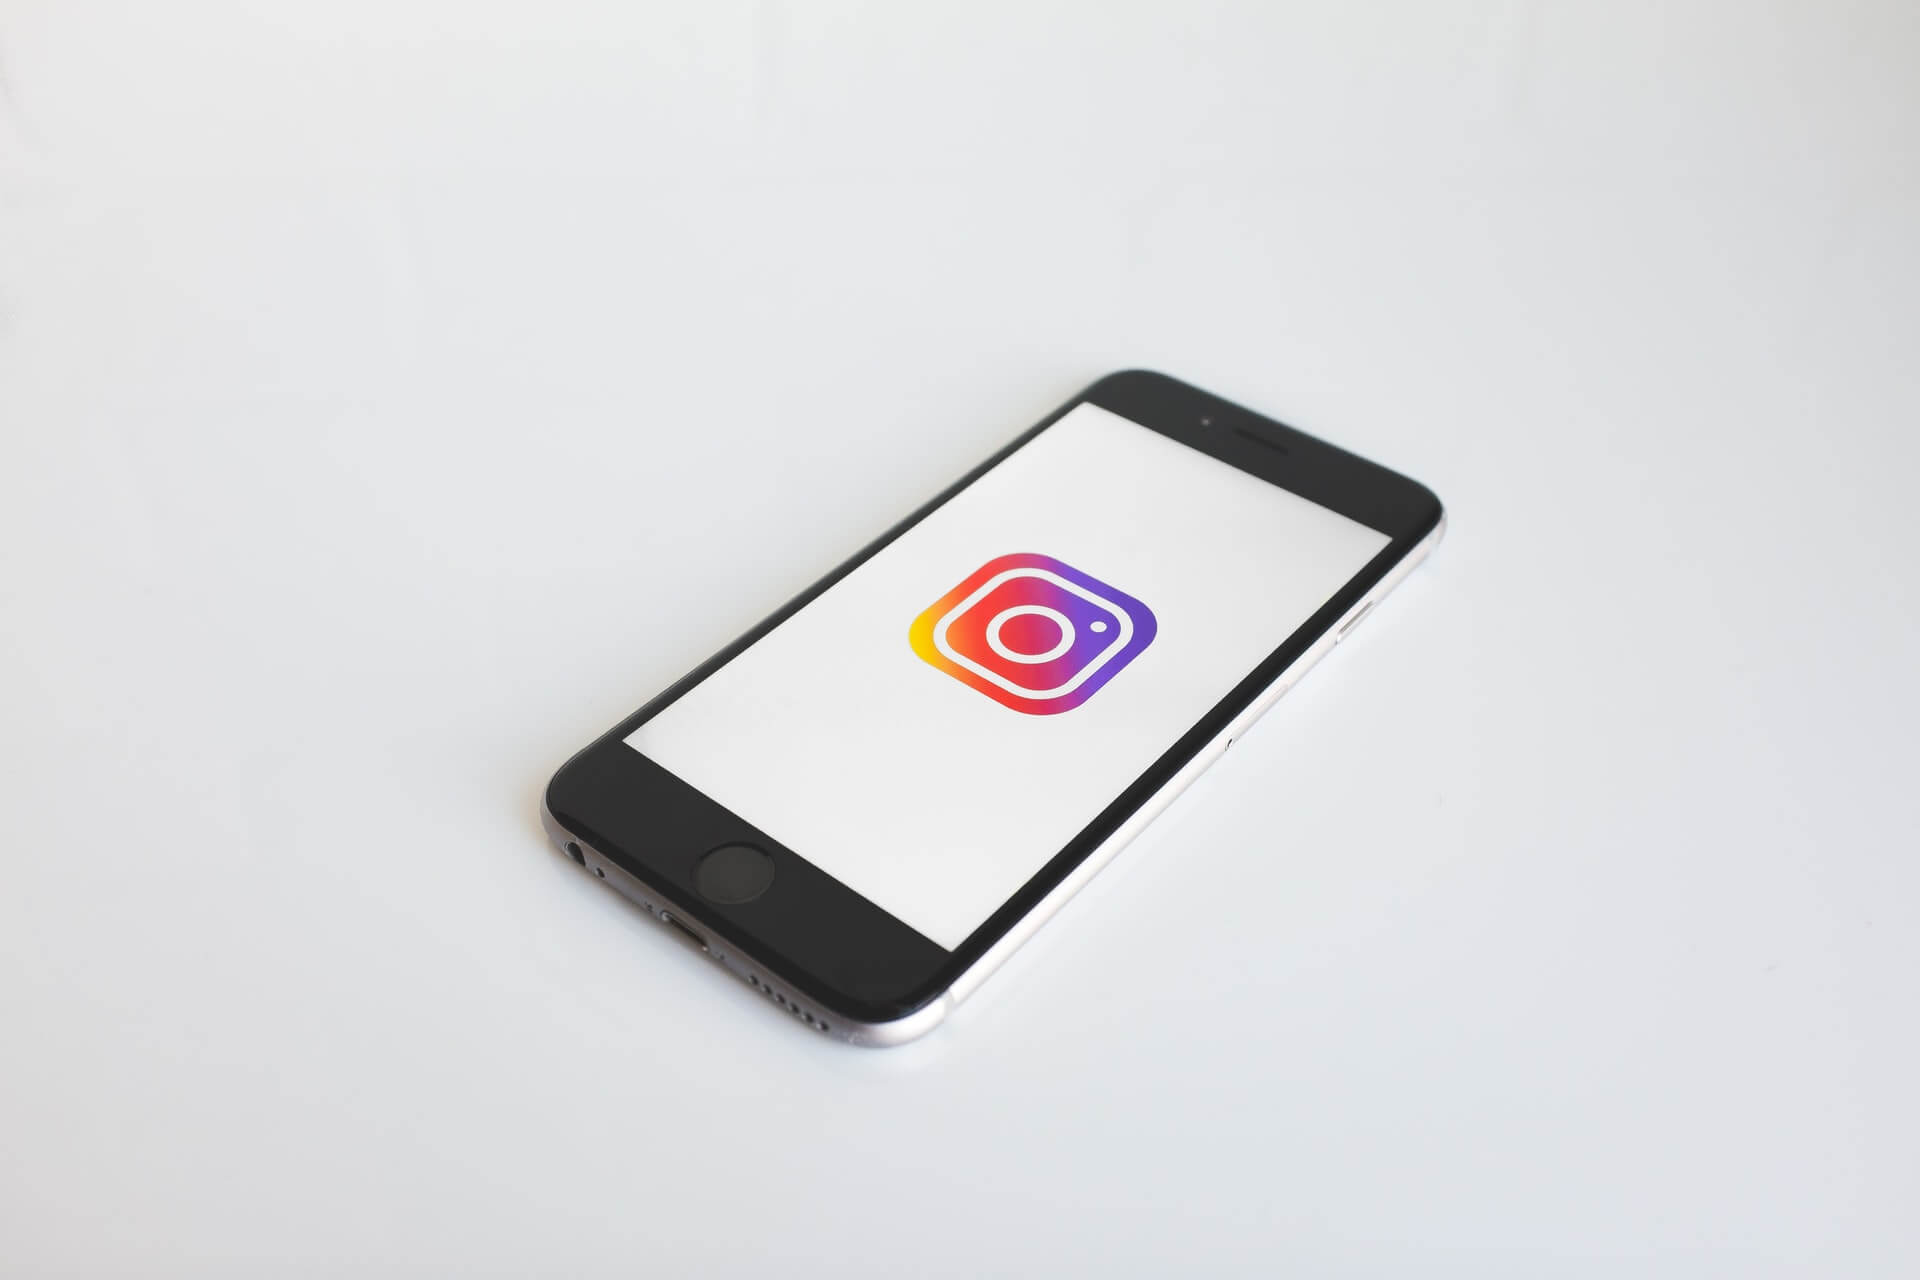 How To Get More Views On Instagram